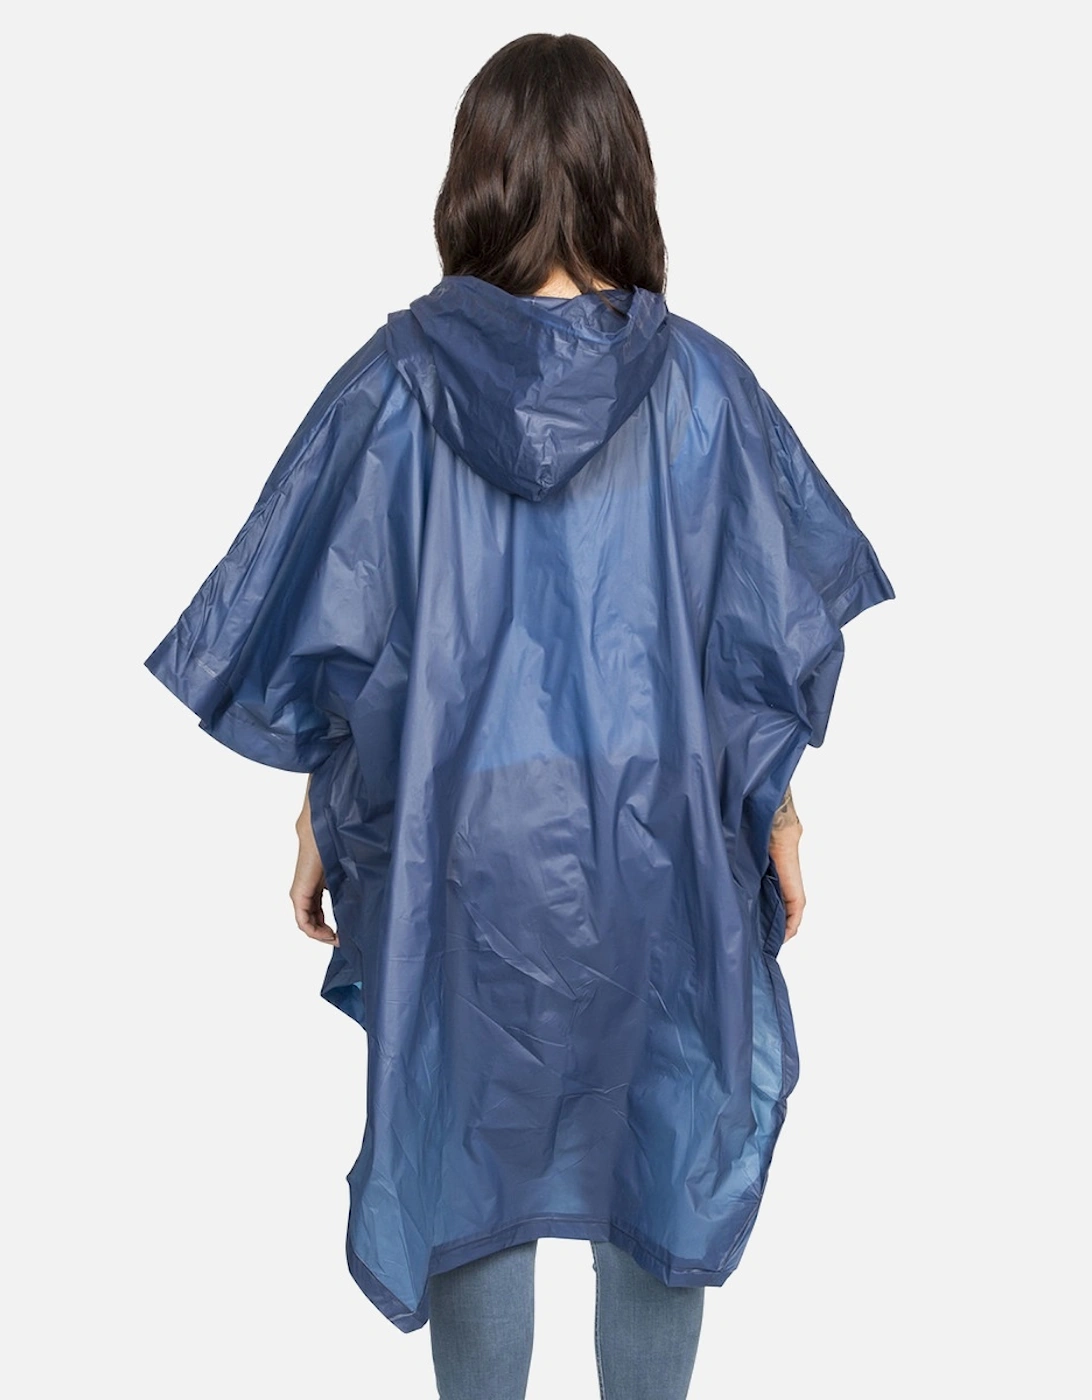 Adults Unisex Canopy Packaway Poncho